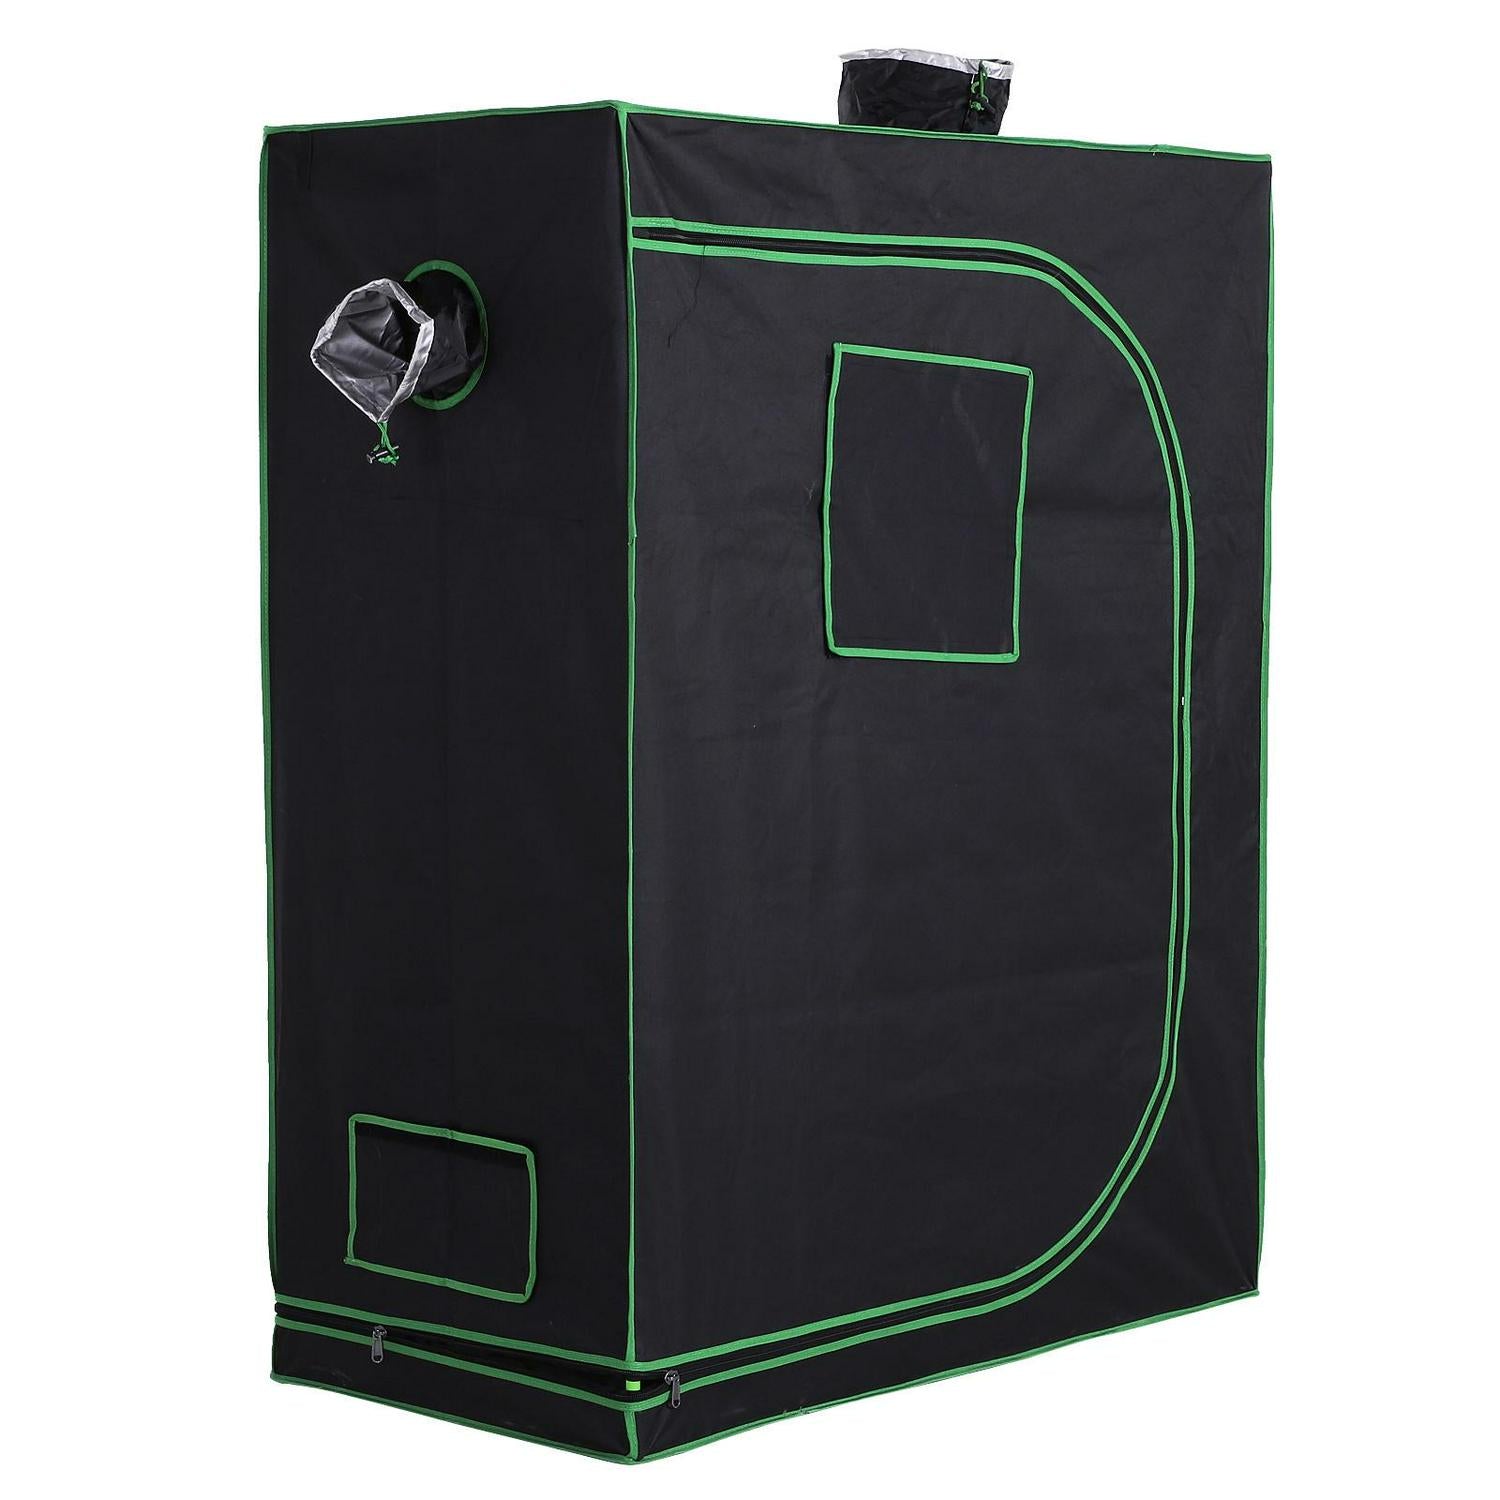 Hydroponic Plant Grow Tent Canopy Indoor Reflective Mylar Green Room 600D Oxford 120L X60W X150Hcm Silver